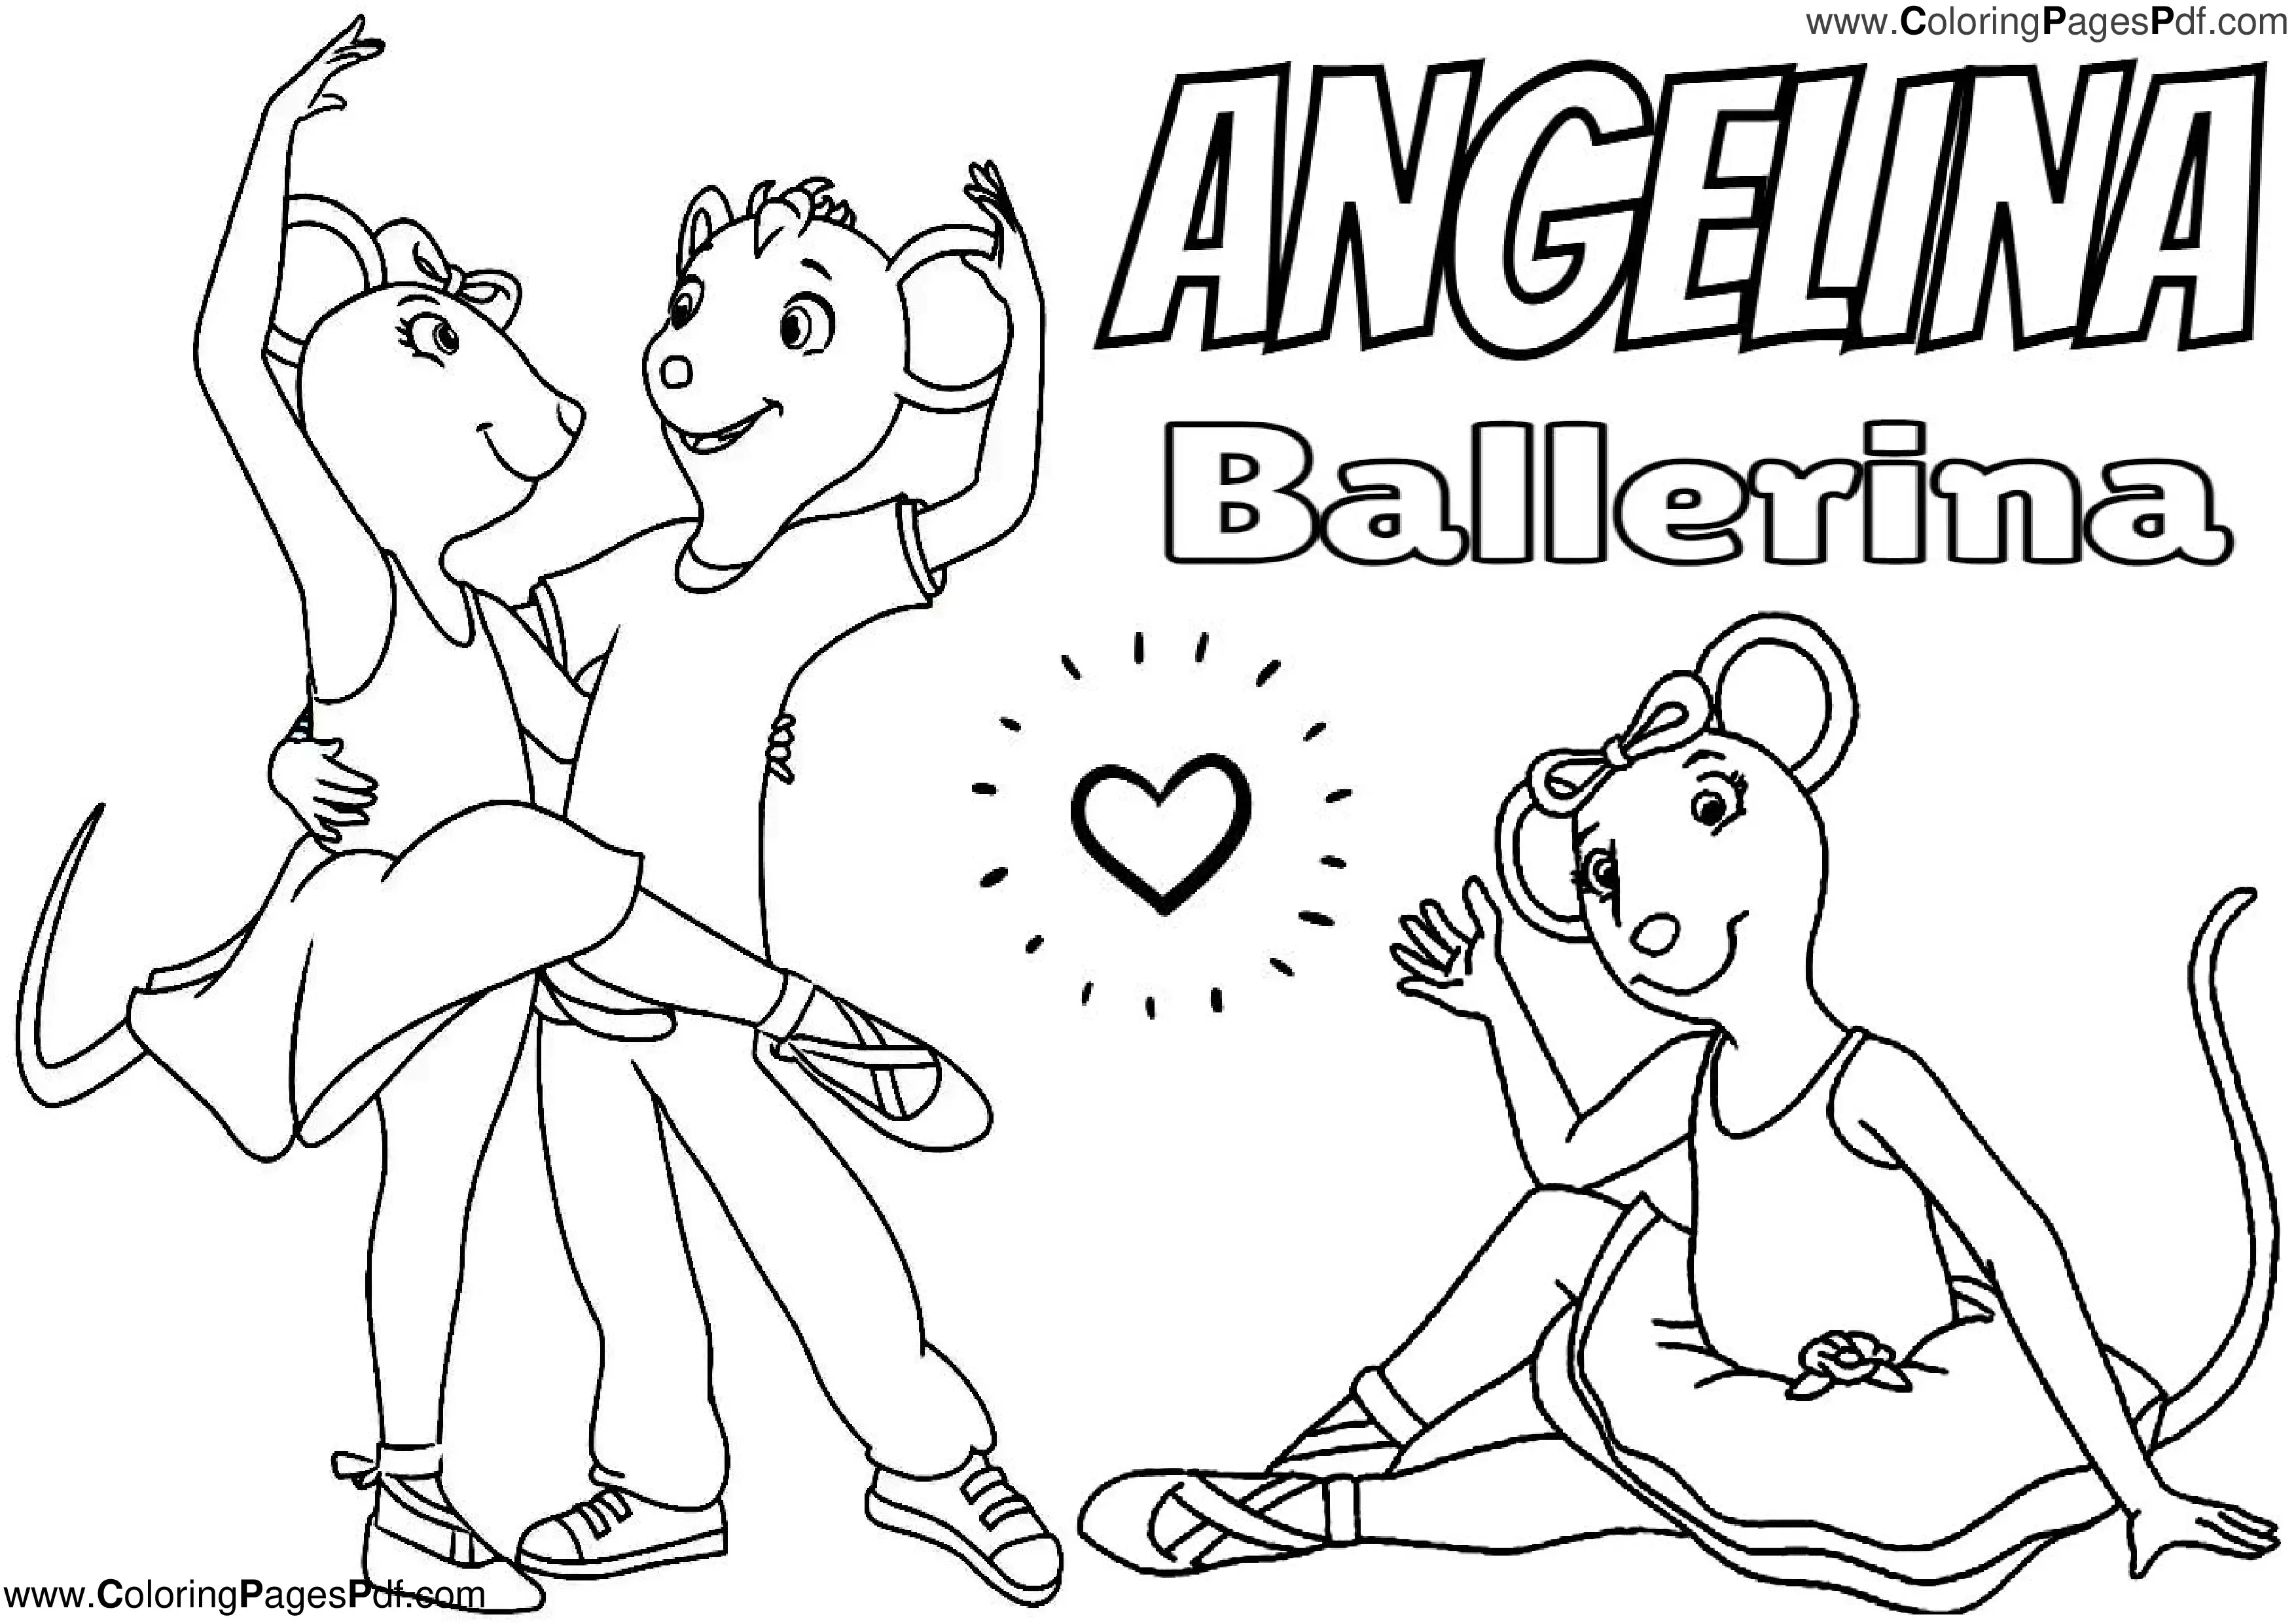 Angelina ballerina coloring pages